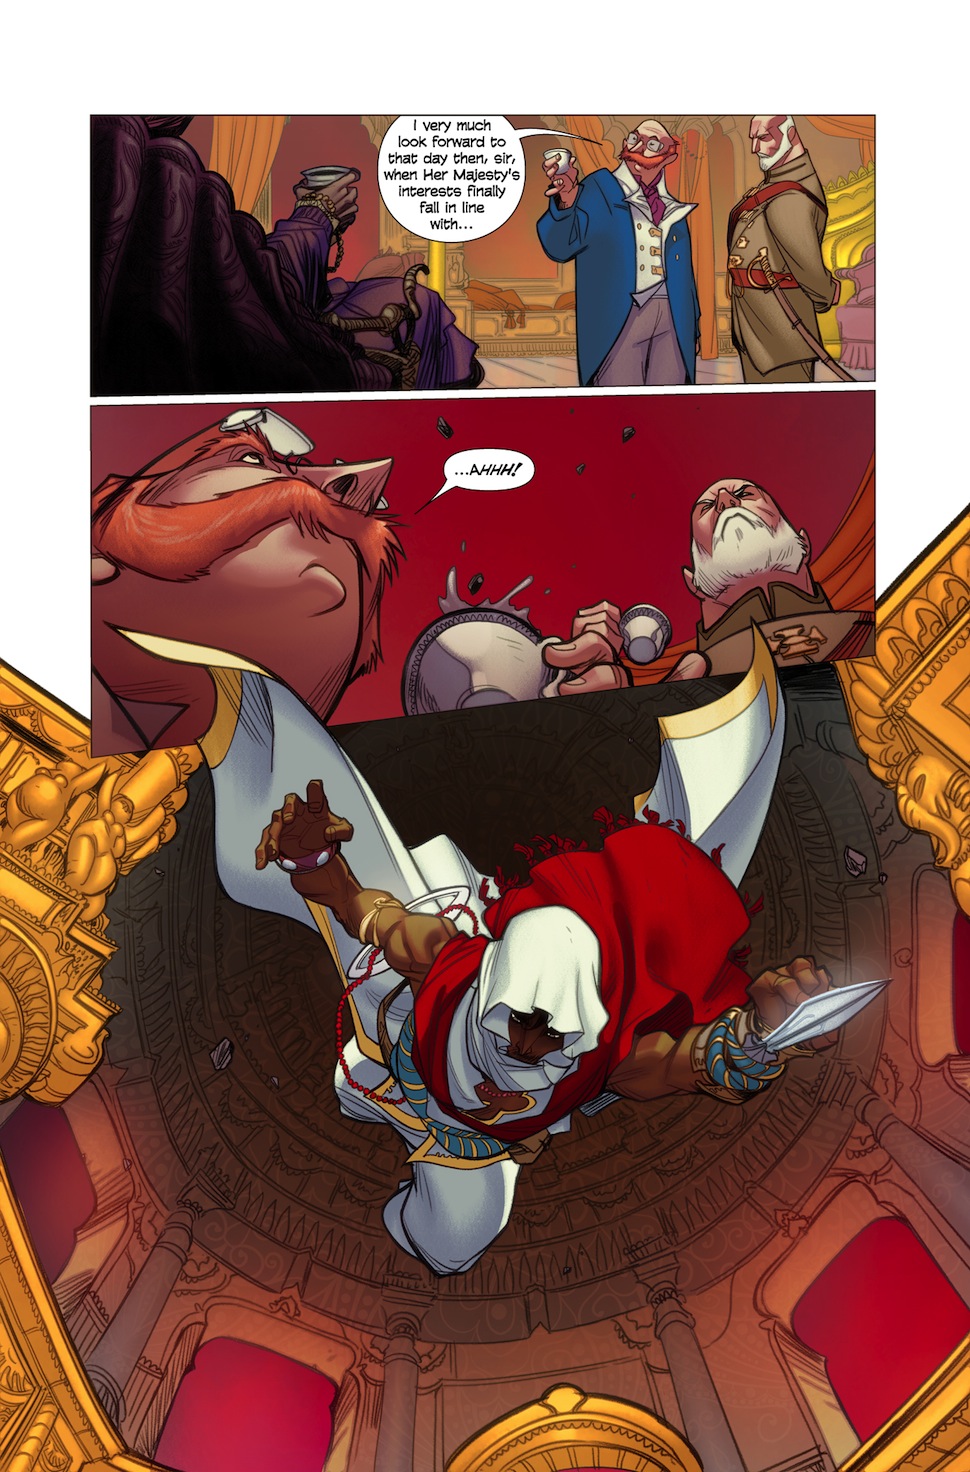 Ubisoft Reveals A New Assassin’s Creed Set In India (It’s A Comic)